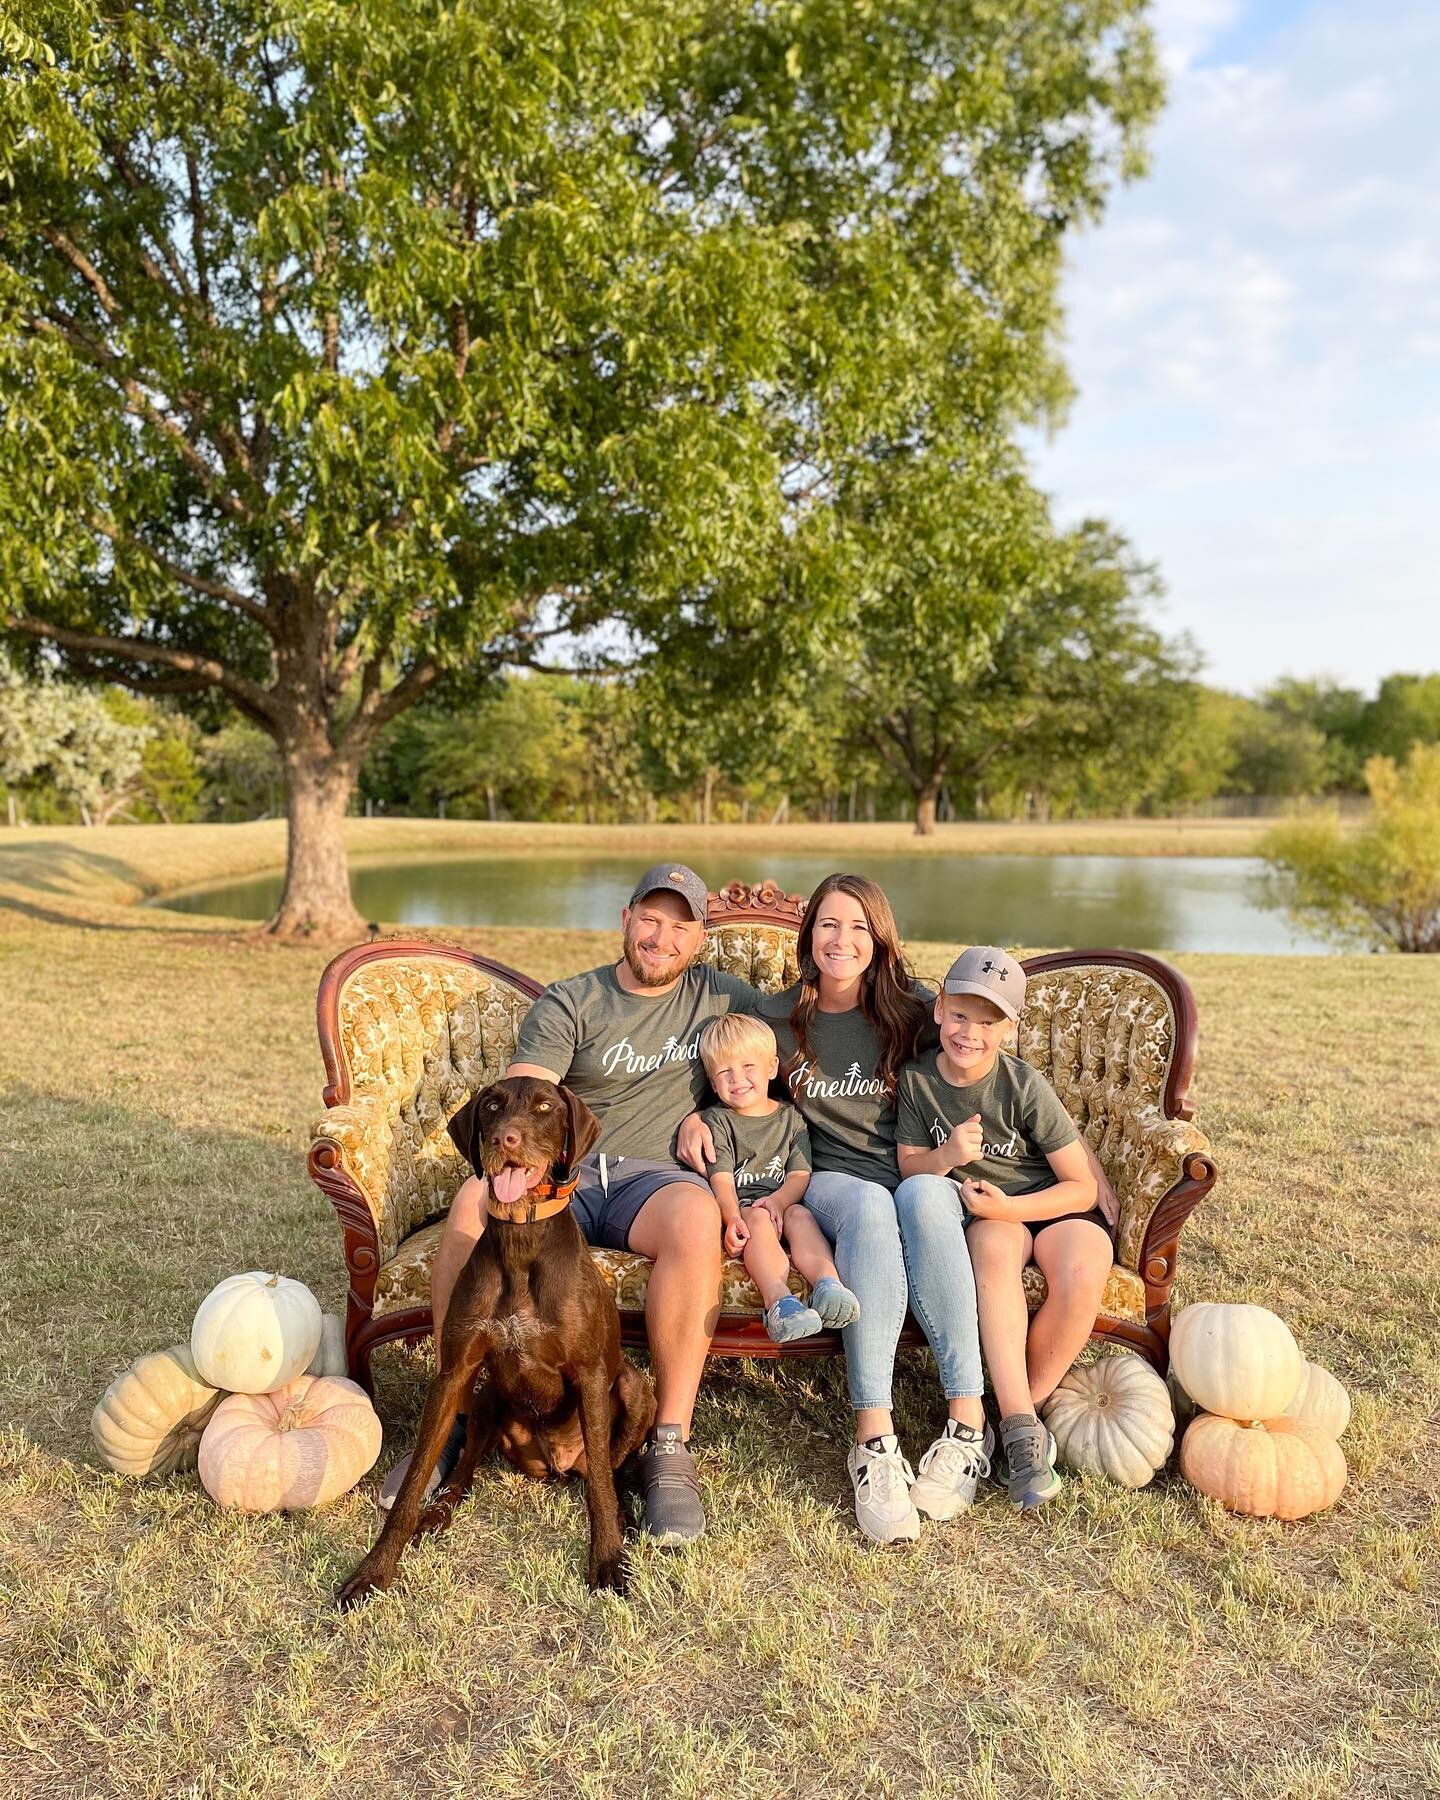 Hi y&rsquo;all! We have some new faces here and I wanted to introduce my family and thank y&rsquo;all for following along! I&rsquo;m Ashley and this is my crew! We also have four babydoll sheep but they are kind of hard to fit in a family photo🙃! Da